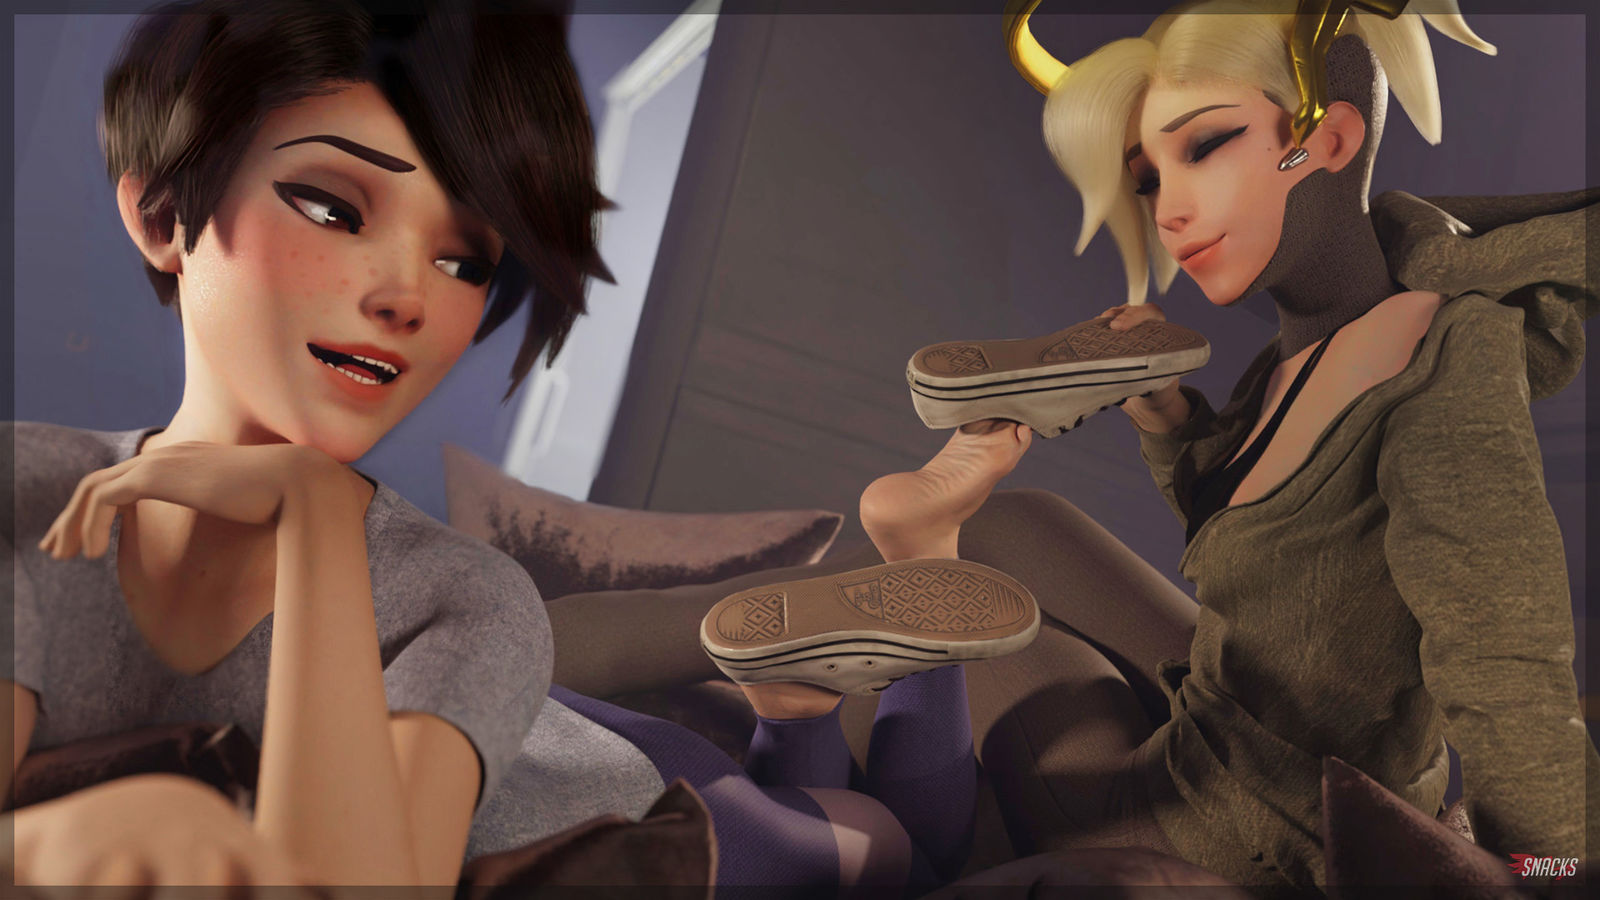 Tracer and Mercy - Shoe Removal插画图片壁纸